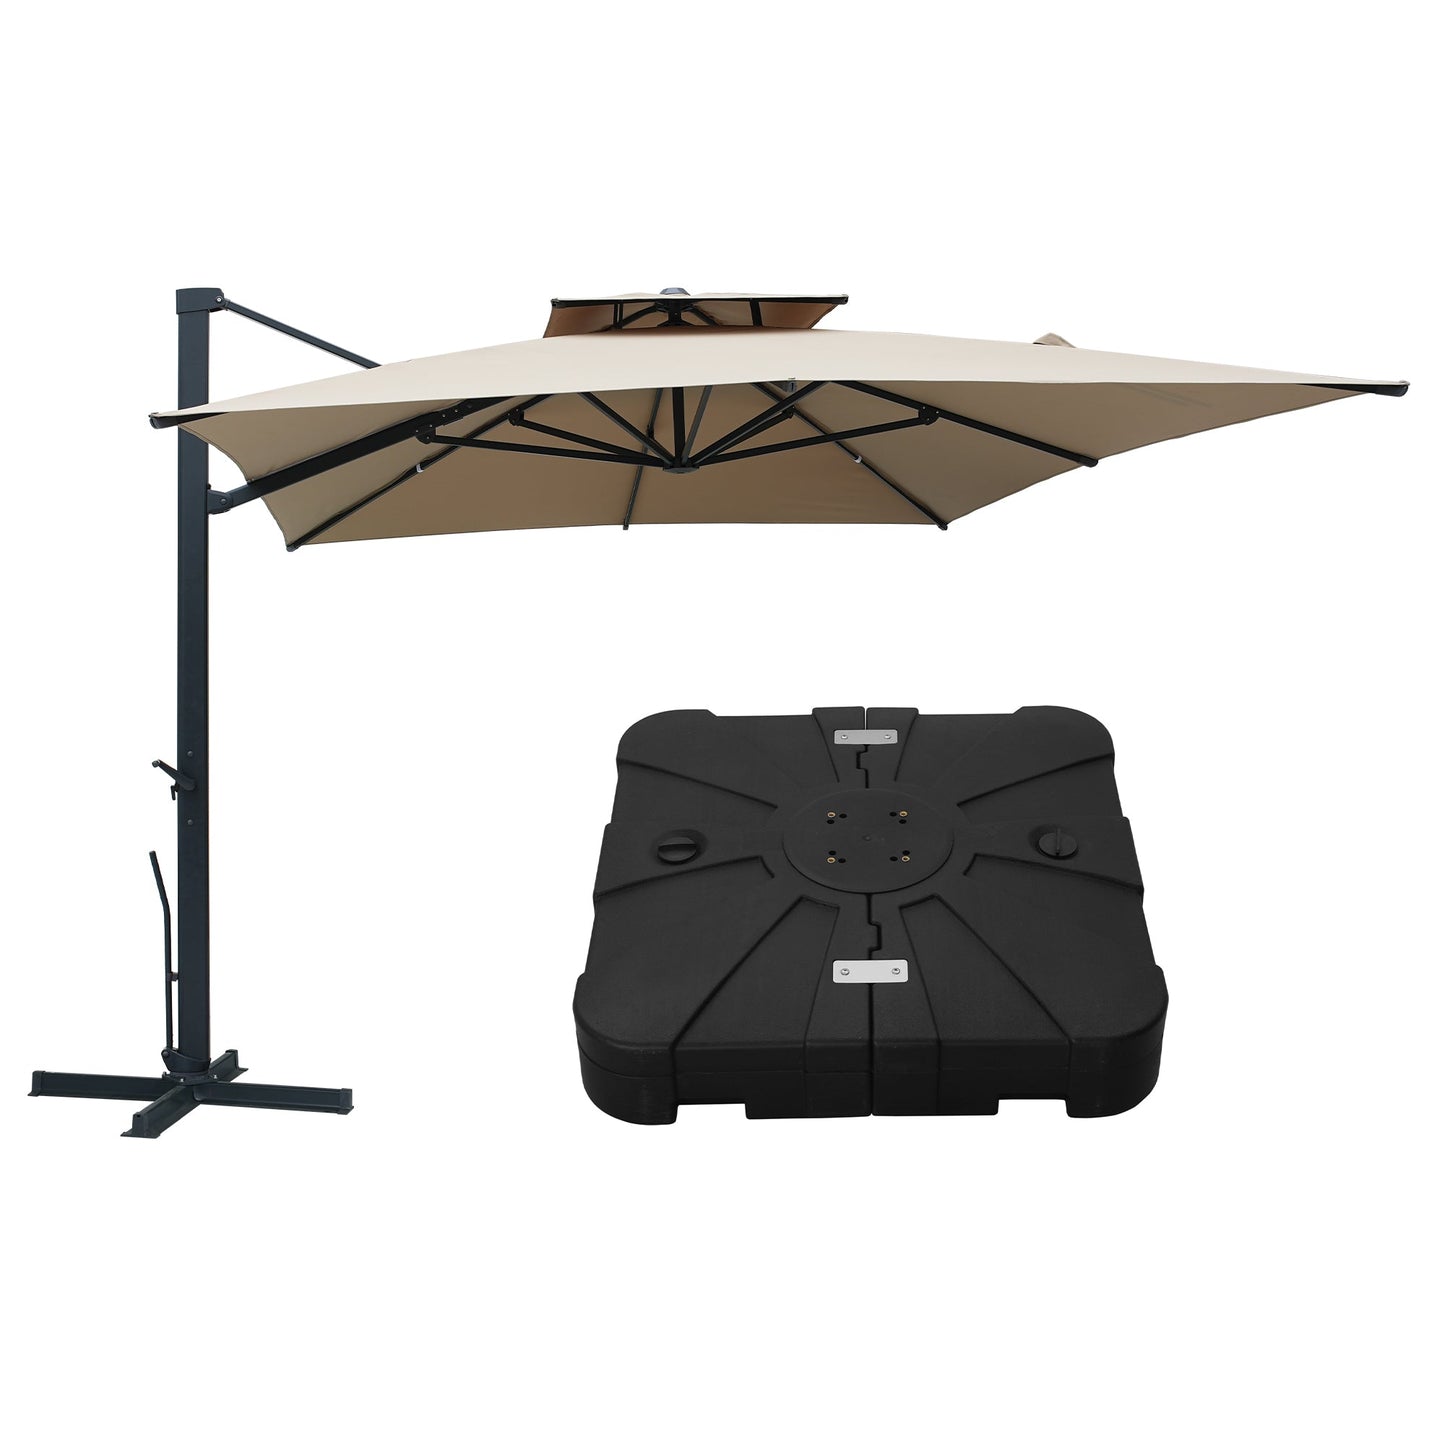 MONDAWE 13ft Patio Double Top Bright Umbrella 360 Rotation Umbrella With Base Stand Included